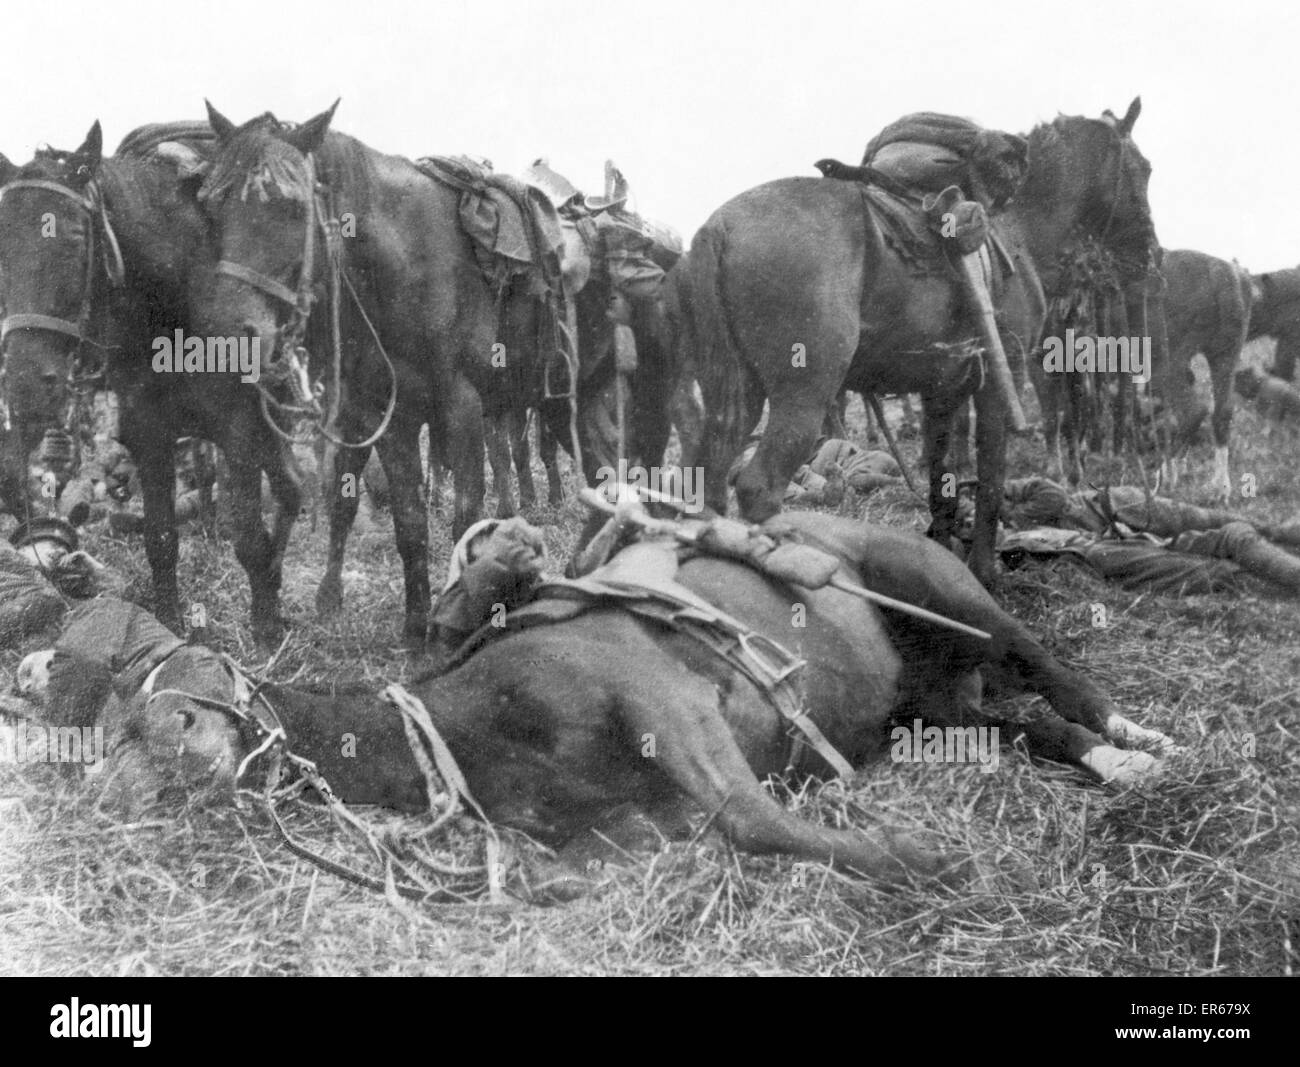 6th Dragoon Guards horse making a pillow of a troopers legs. The impression on the face of the horse makes one think it is enjoying the luxury. 9th January 1915 Stock Photo